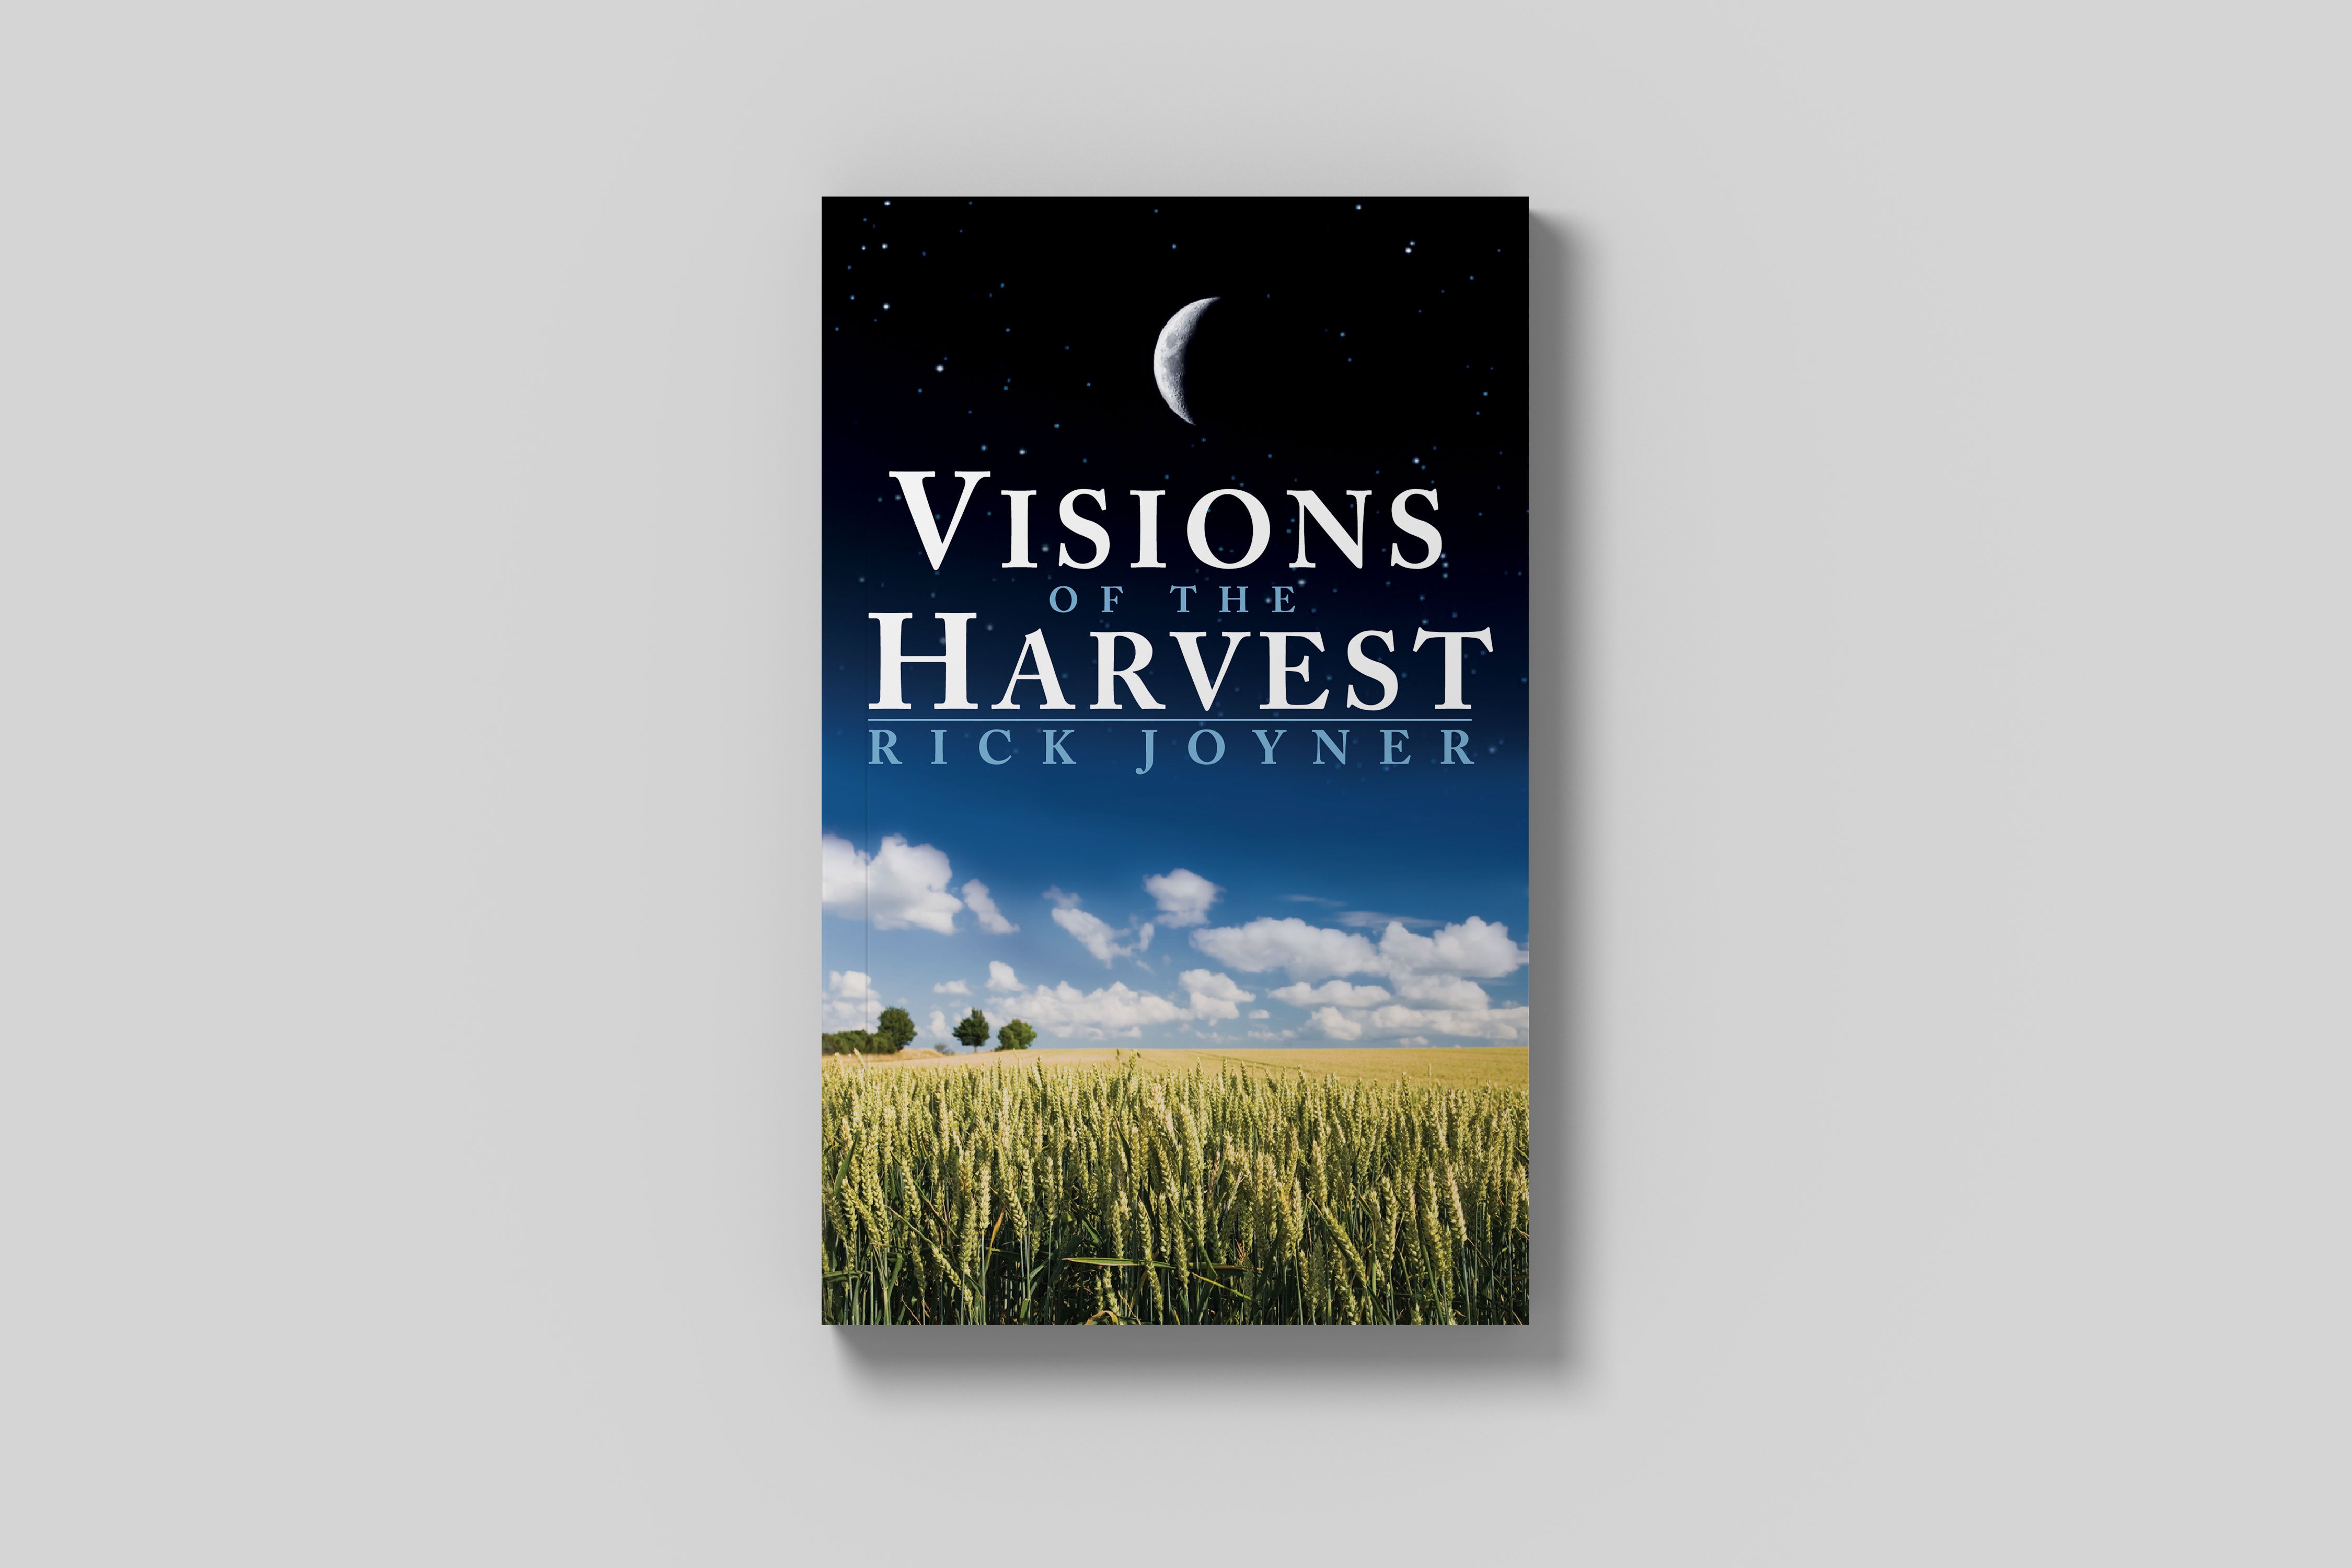 Visions of the Harvest